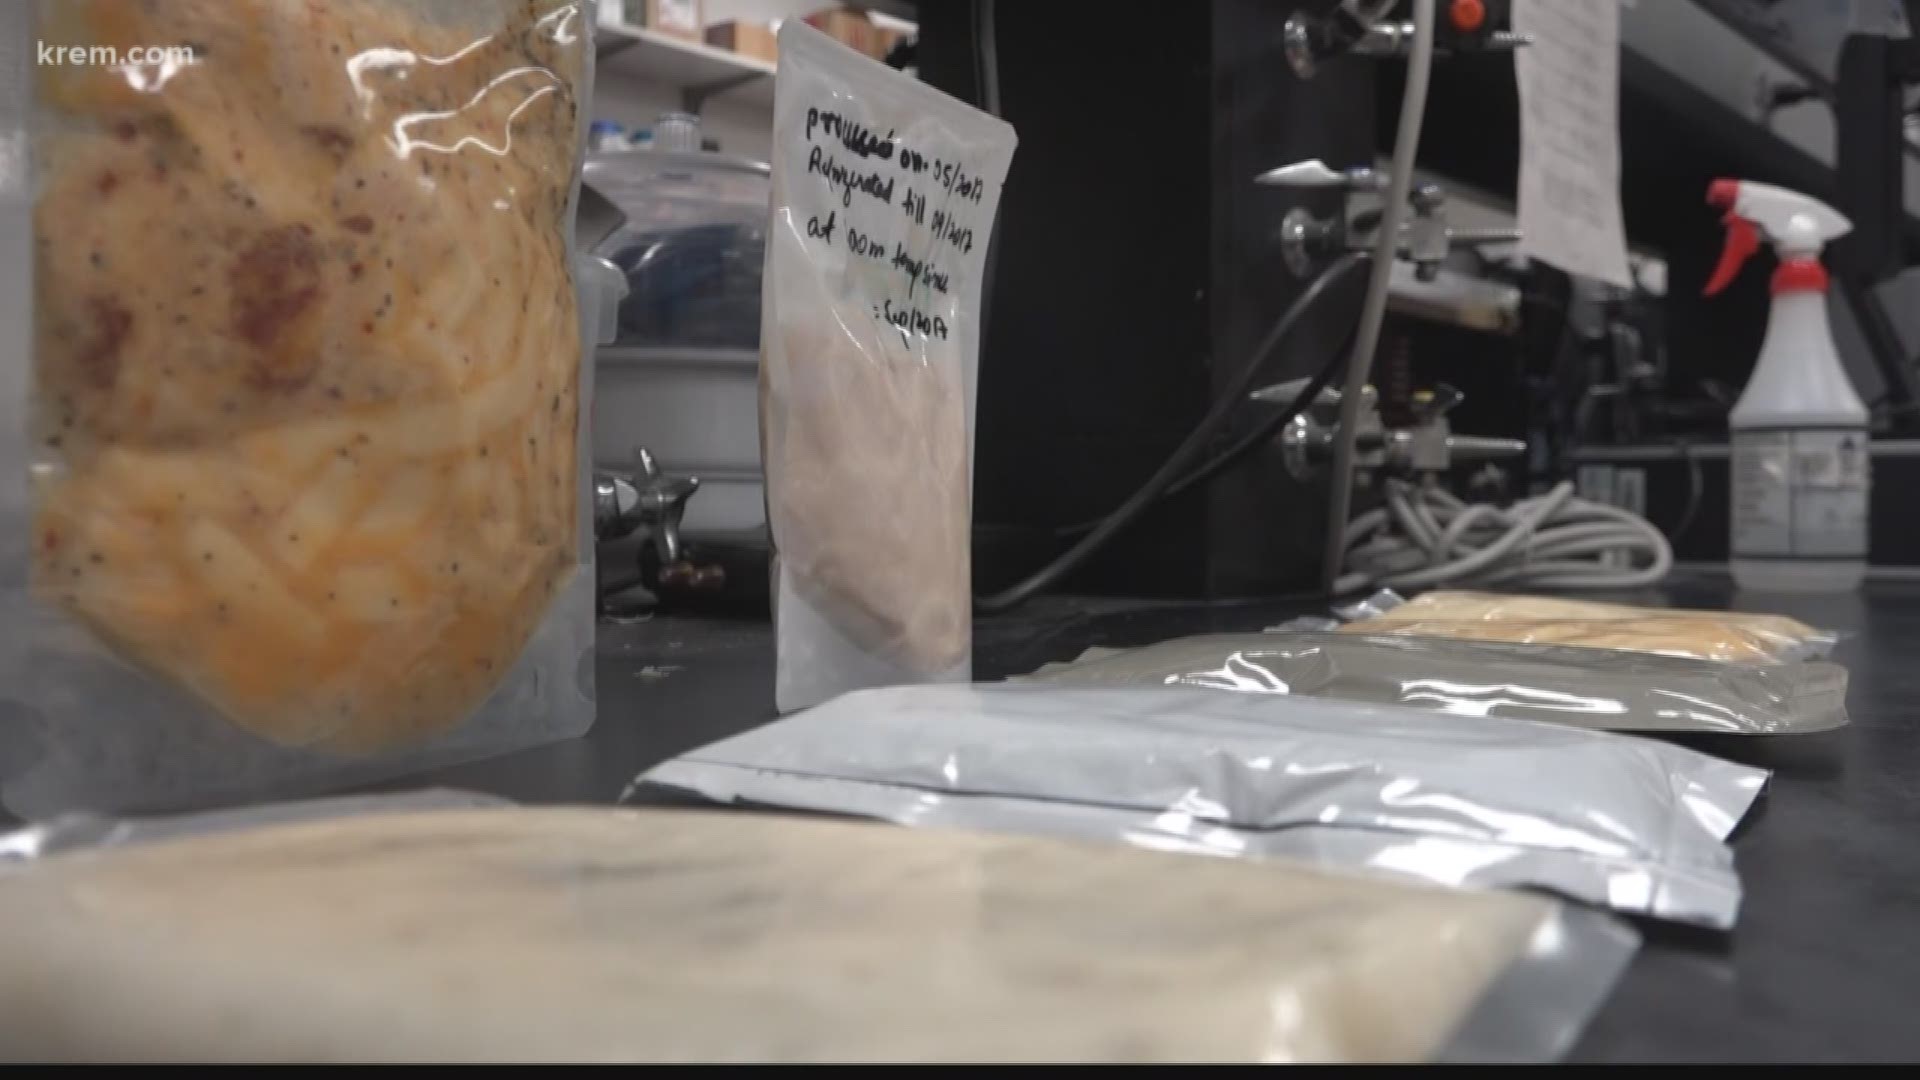 WSU researchers are working to create mac 'n cheese with a five-year shelf-life. The food would be used by NASA and the U.S. Army.